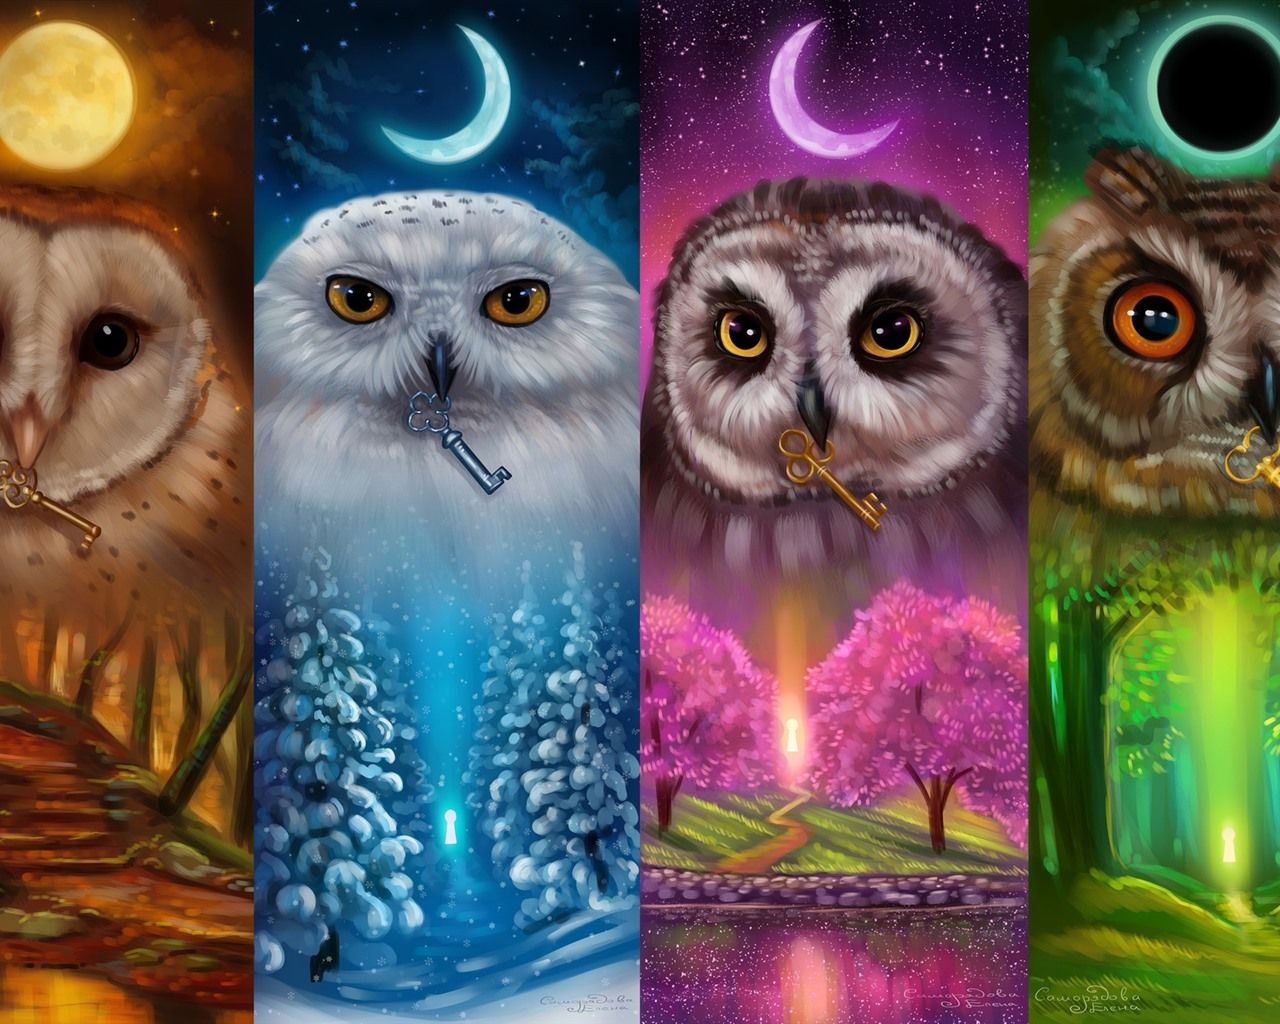 Colorful Owls, Four Season, Art Picture 640x1136 IPhone 5 5S 5C SE Wallpaper, Background, Picture, Image